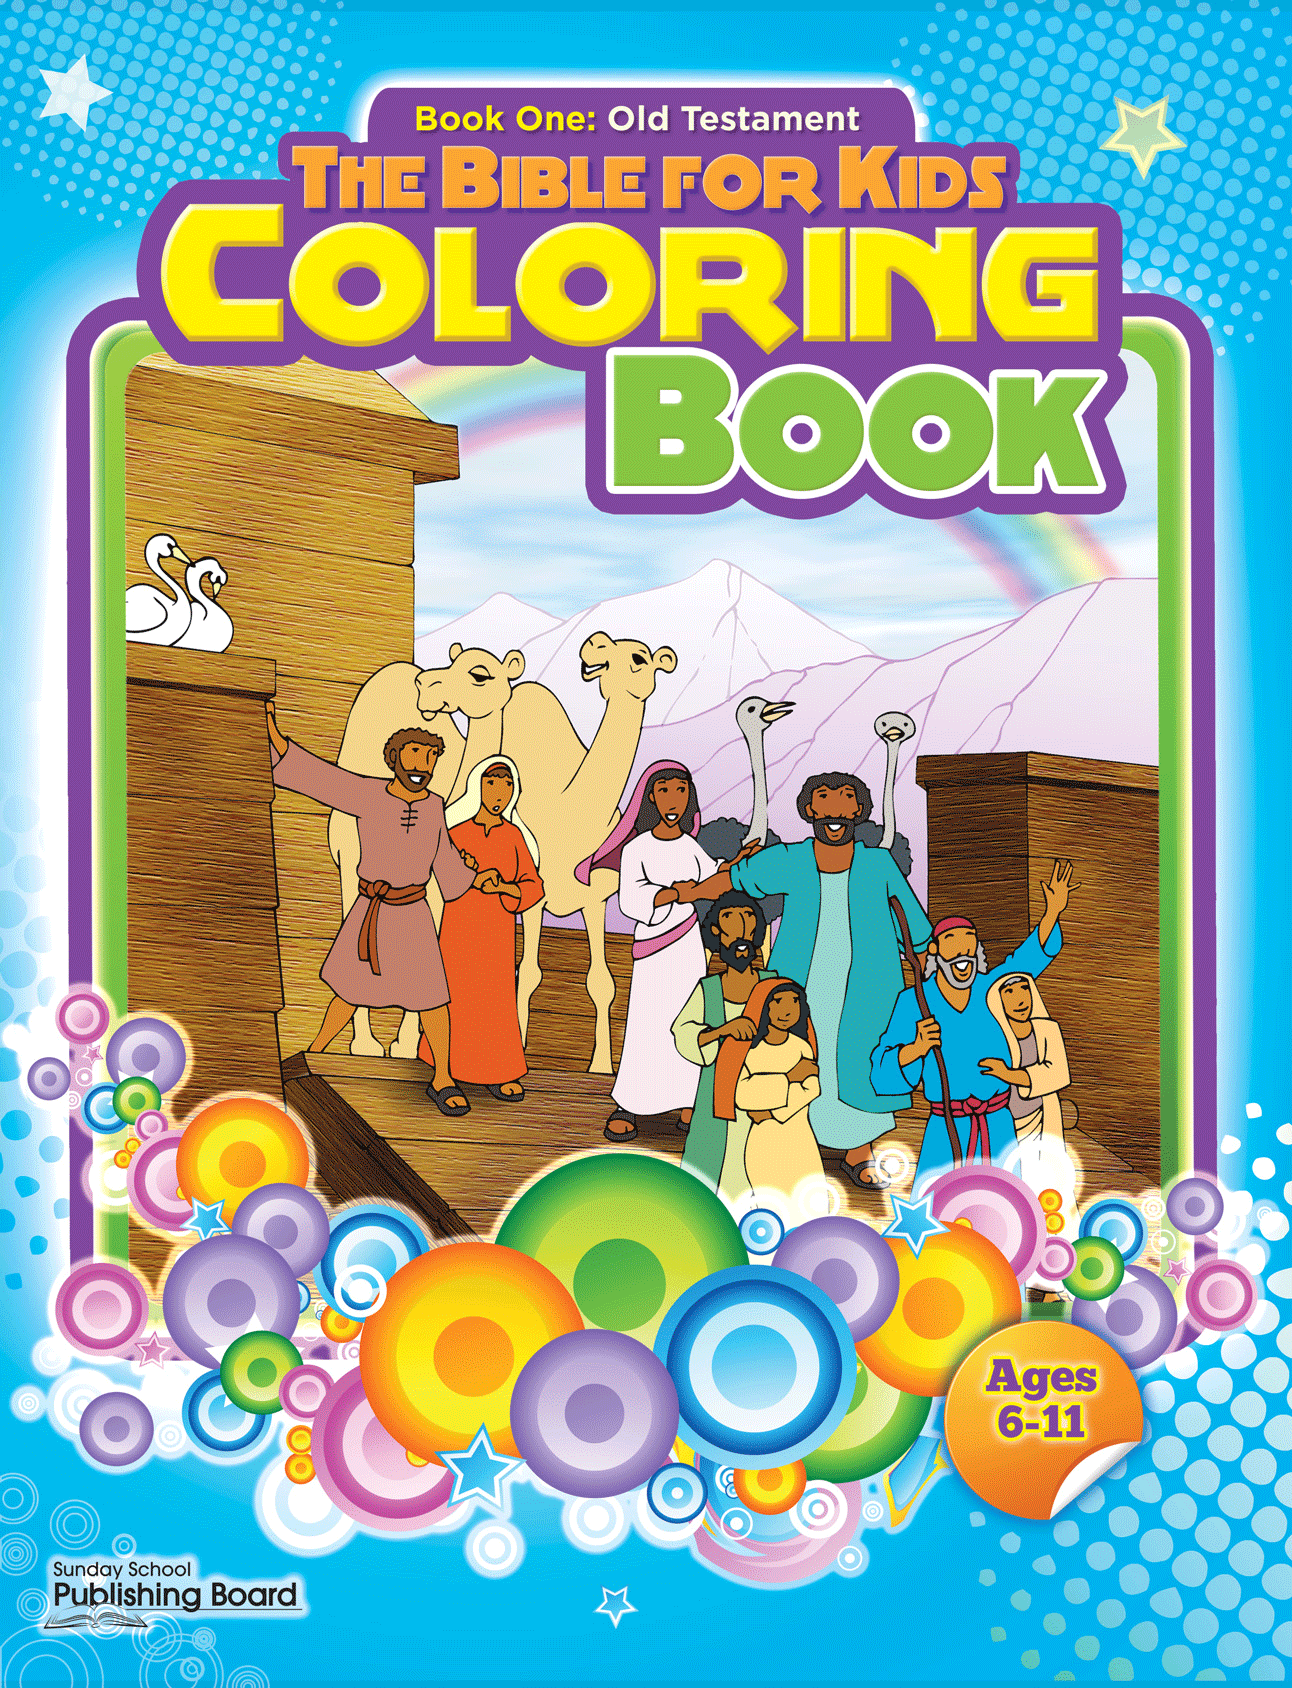 Download The Bible For Kids Coloring Book Book One Old Testament Sunday School Publishing Board